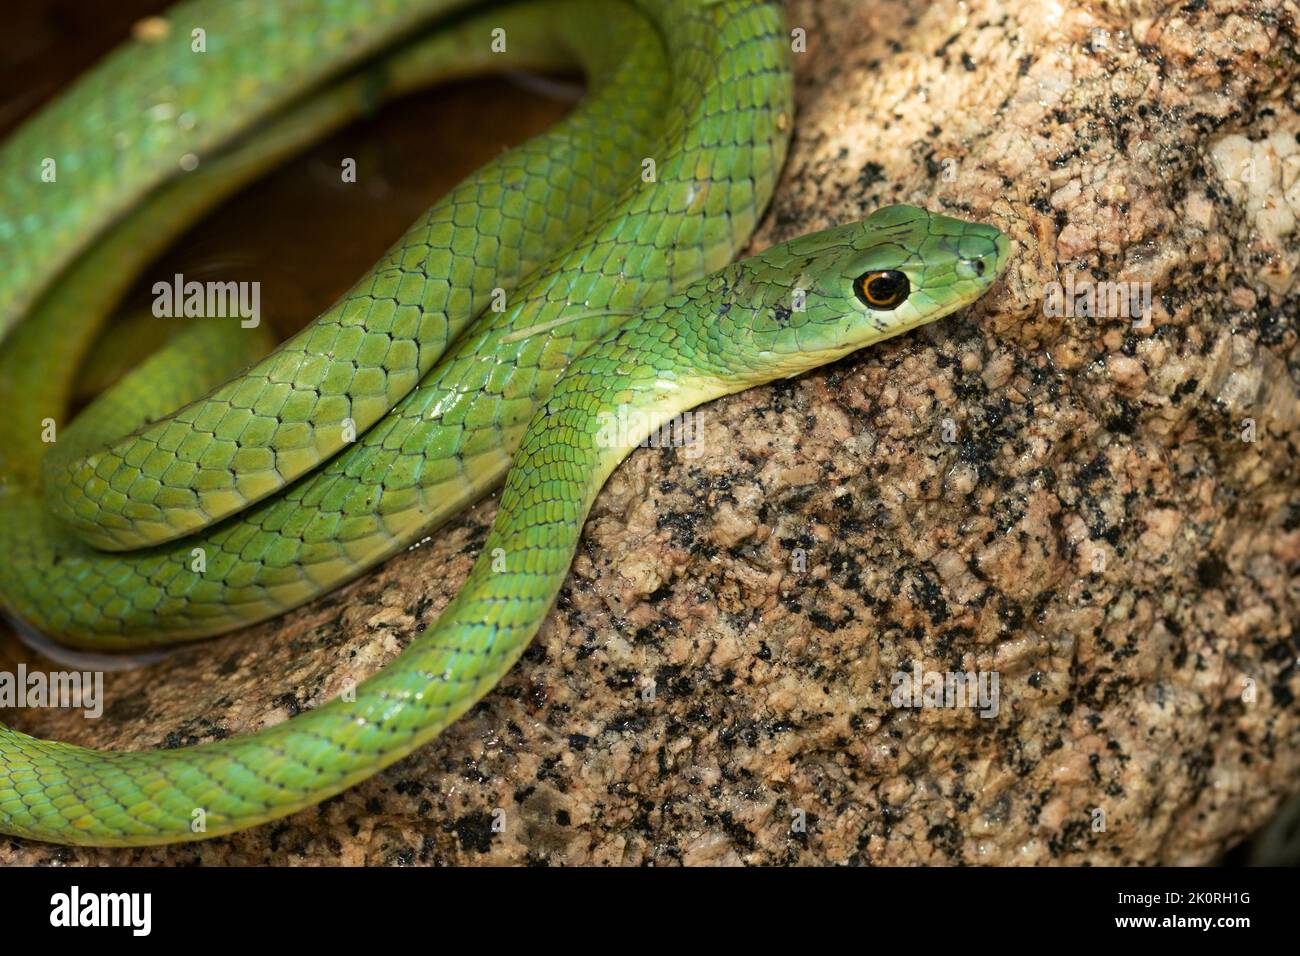 An arboreal serpent that will tolerate drier climates than most of its relatives. The Speckled Green Snake is common with superb camouflage Stock Photo